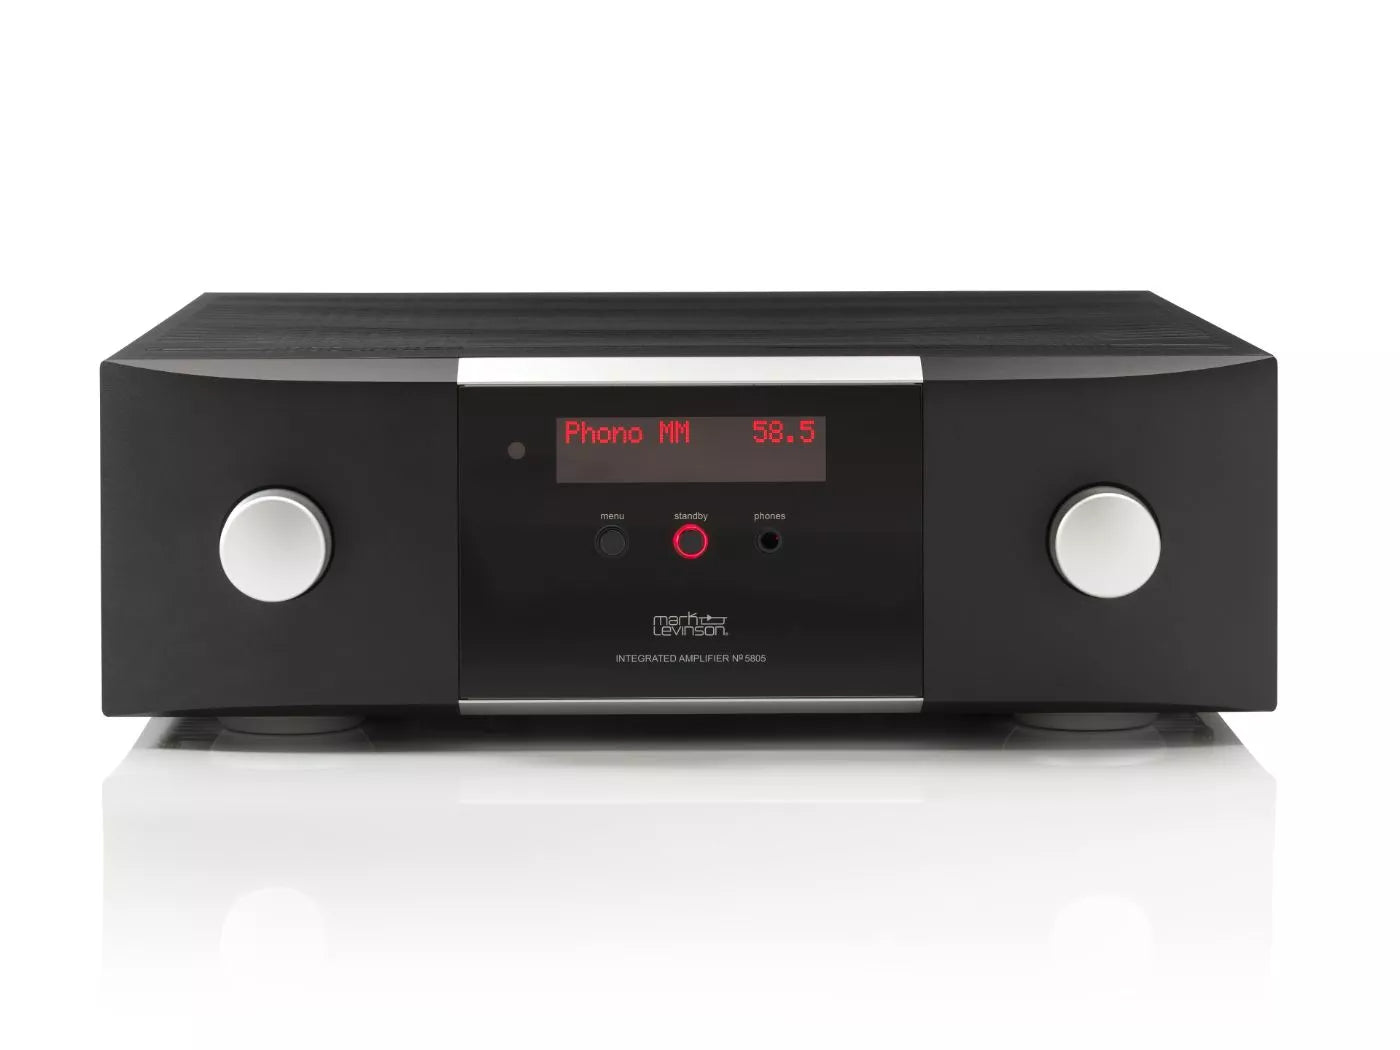 Experience the true power of your music with an integrated amplifier that allows you to hear the unique character of every note. The Mark Levinson № 5805 contains a high-quality preamplifier, phono stage and amplifier in one seamless package, delivering dynamic sound for your entire digital and analog music collection.